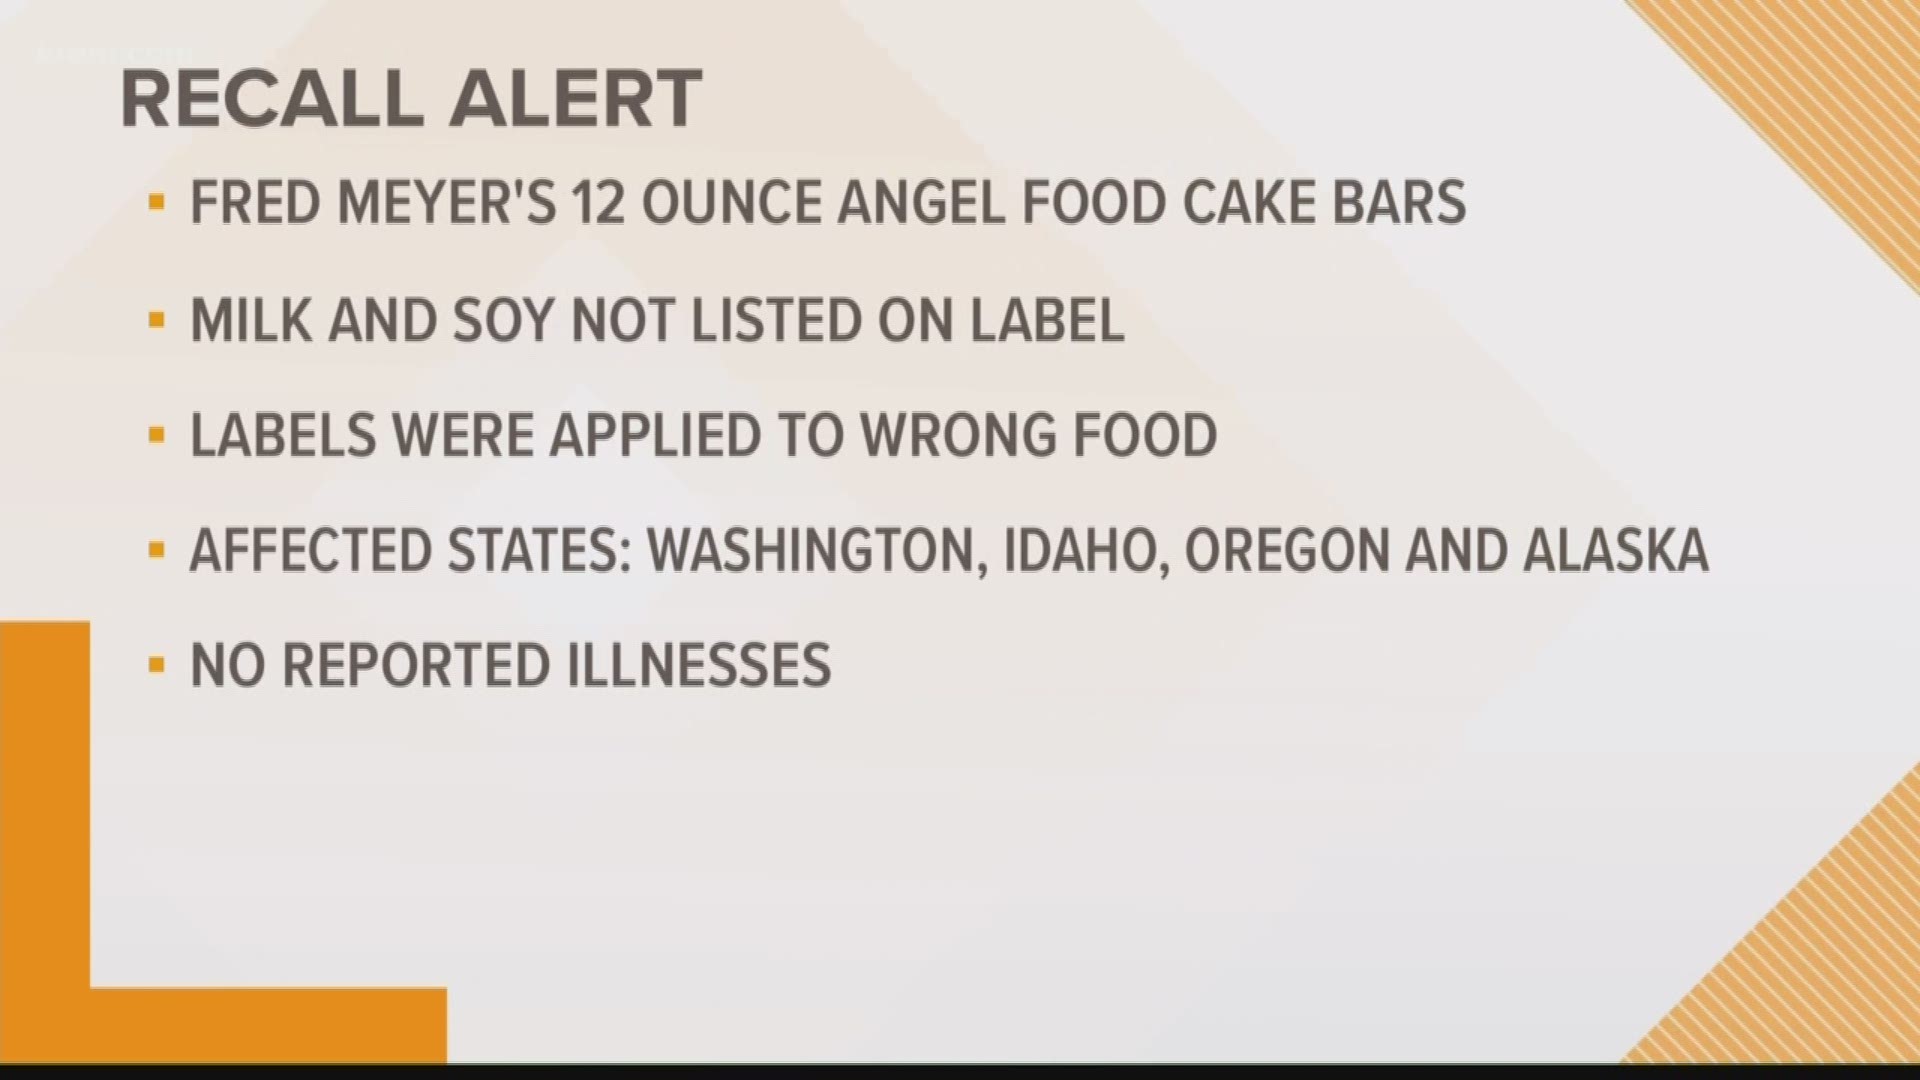 Fred Meyer issues recall for angel food cake bars